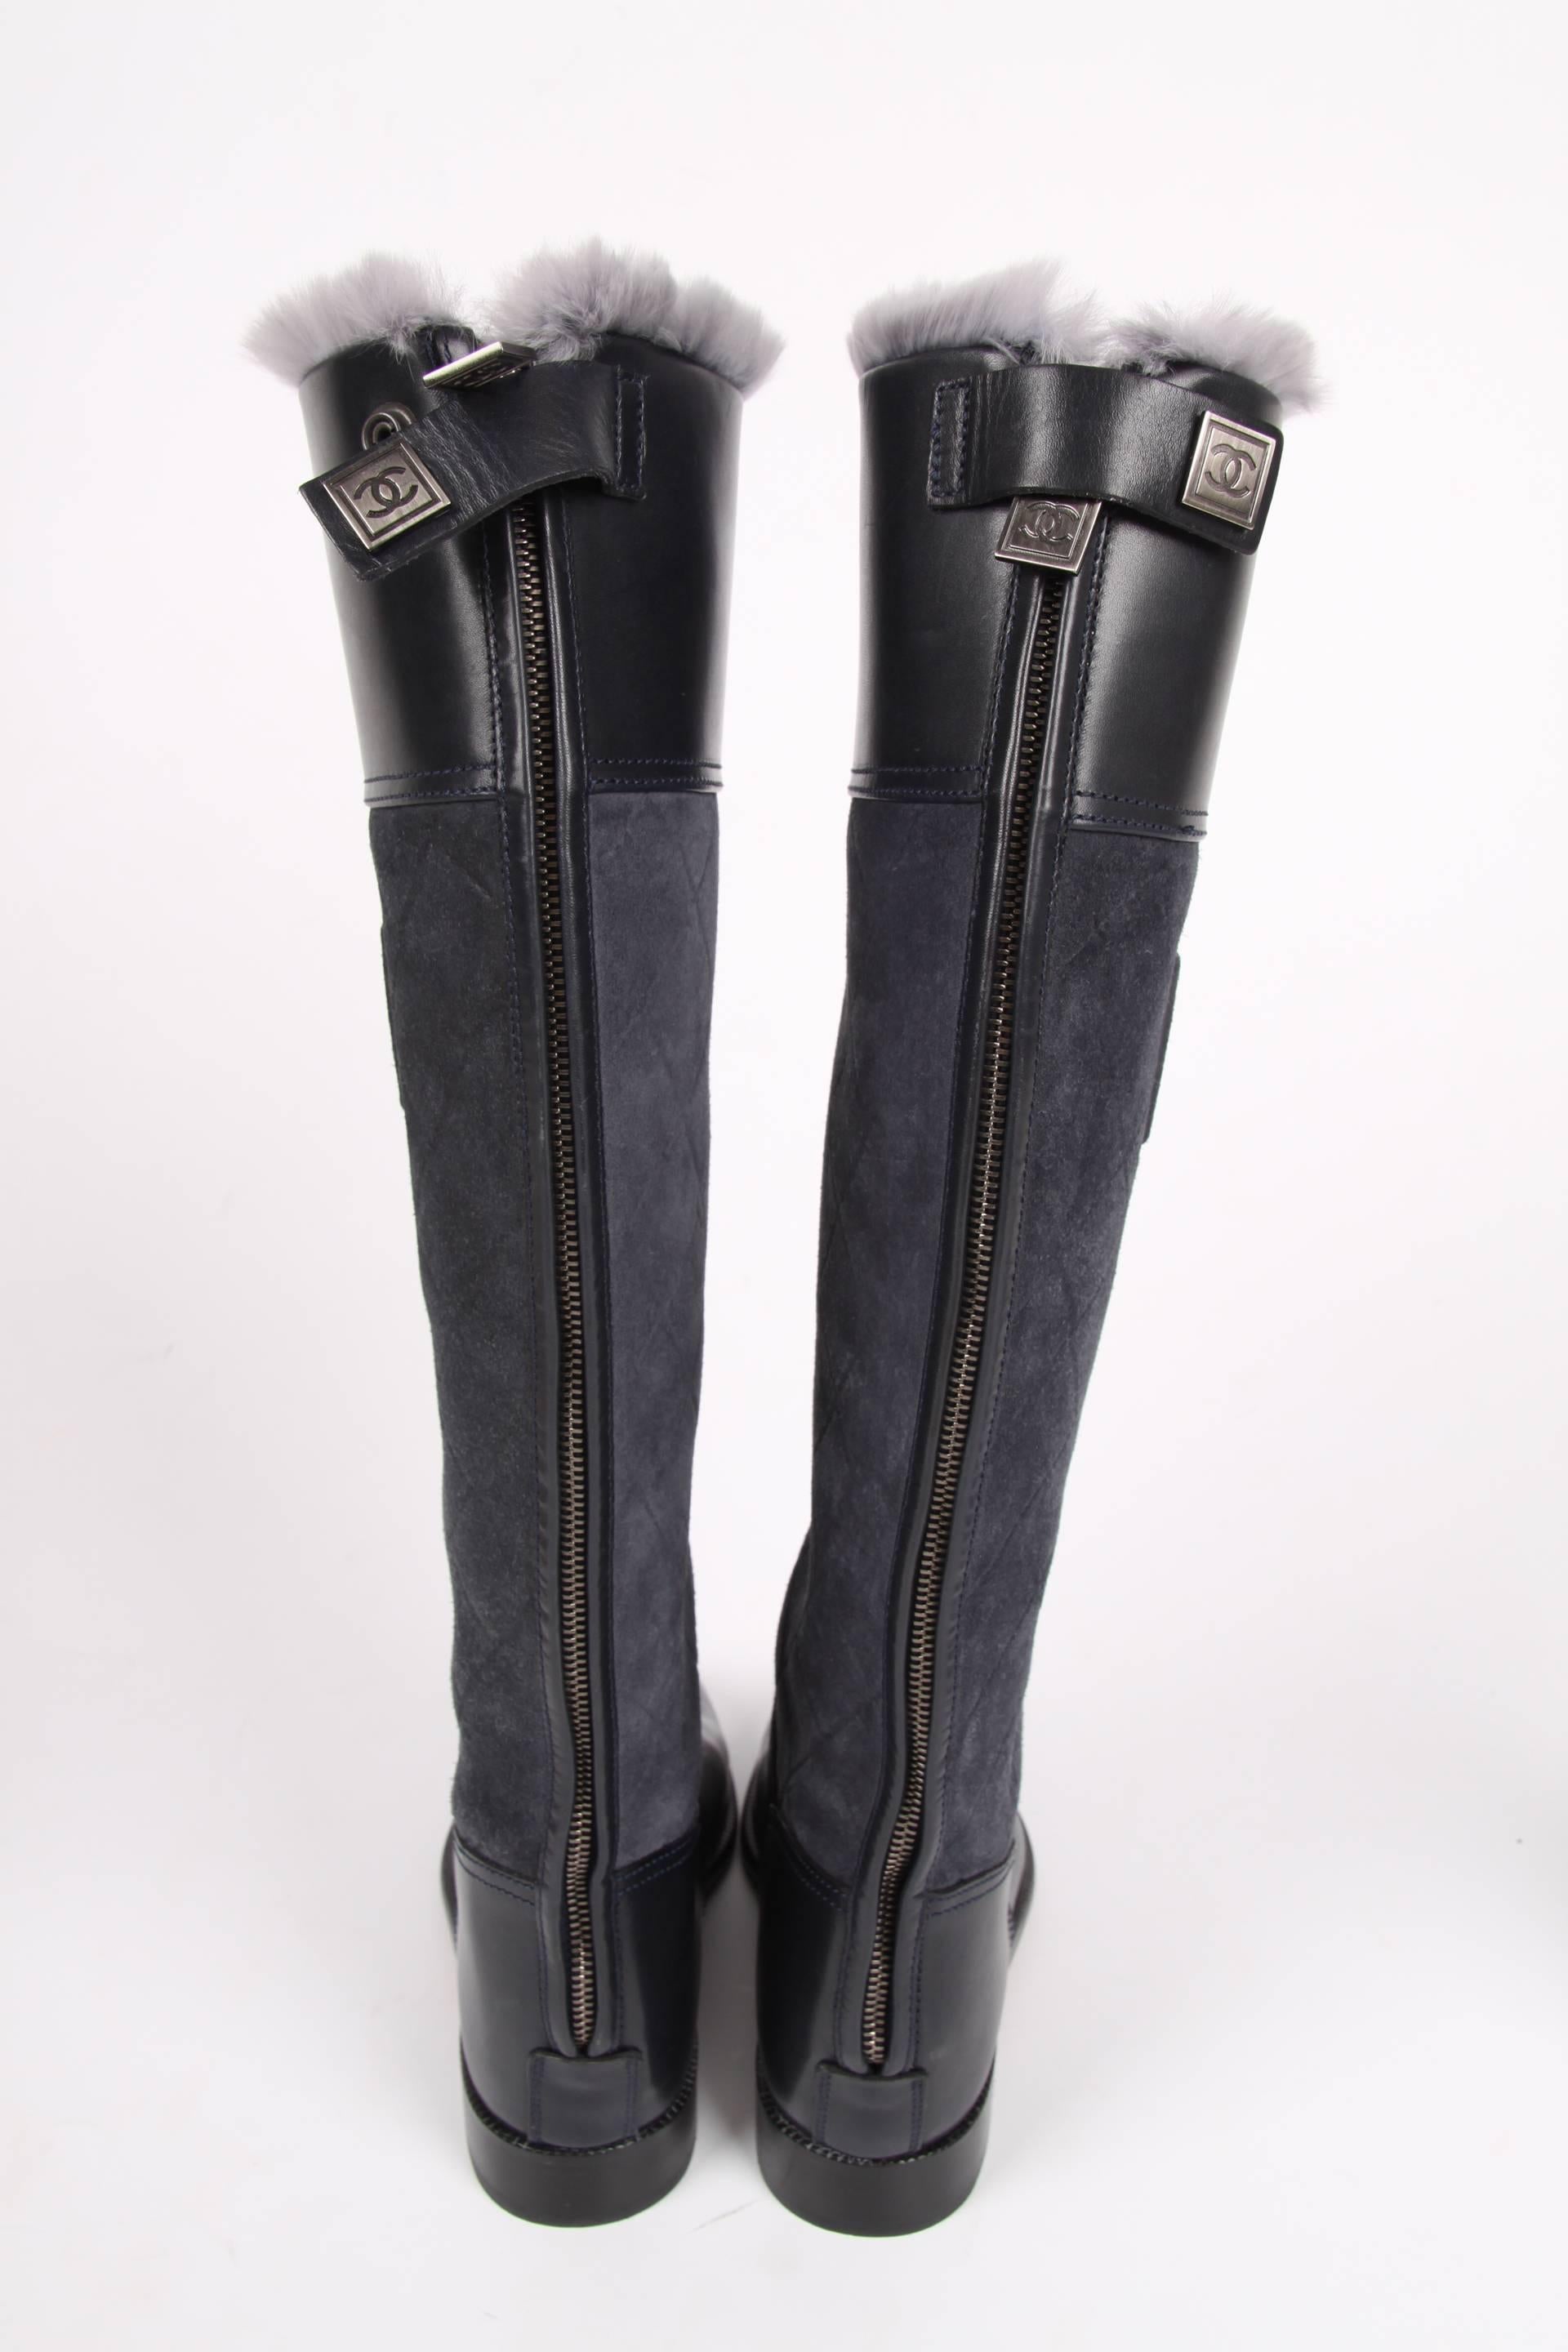 chanel black riding boots